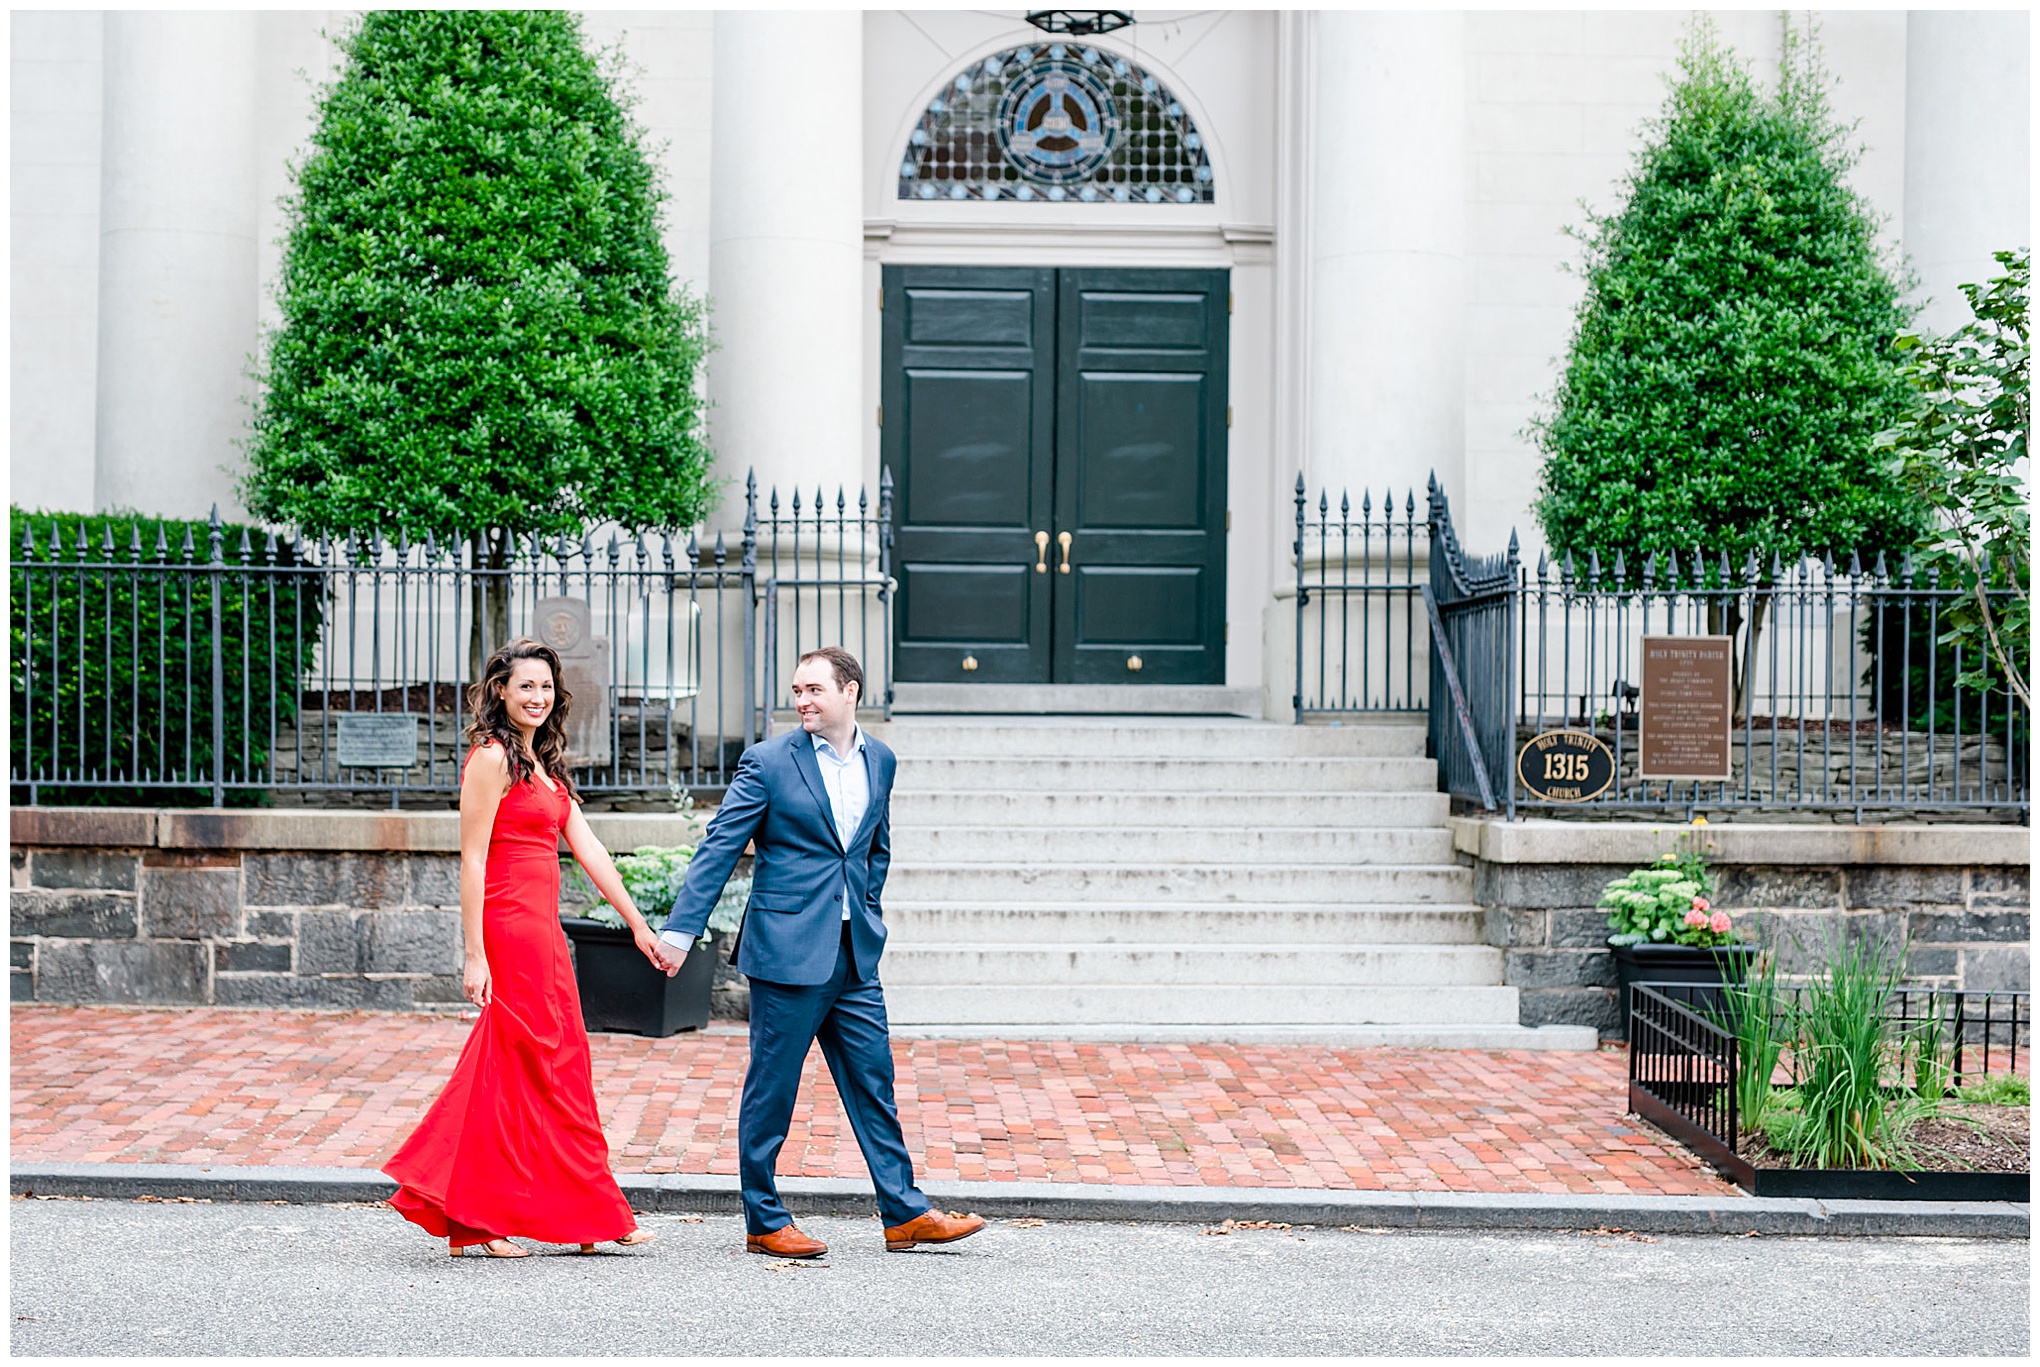 summer Georgetown engagement photos, DC engagement photos, classic engagement photos, summer engagement photos, summer engagement photo outfits, classic engagement photo outfits, Rachel E.H. Photography, DC wedding photographer, DC engagement photographer, DC proposal photographer, DC photographer, couple walking, red gown